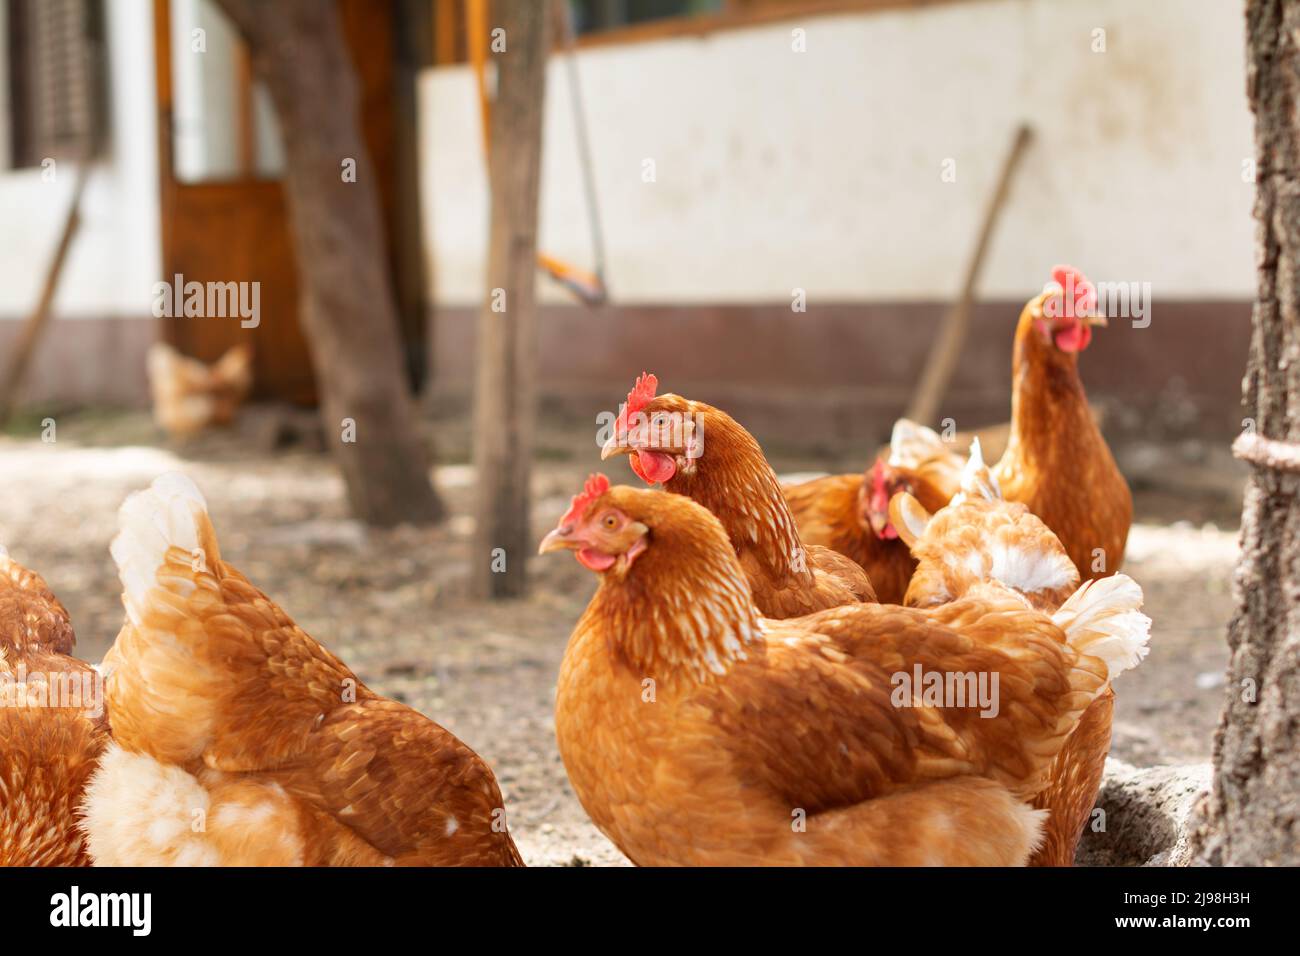 A flock of Cinnamon Queen hens. A beautiful reddish-brown egg-laying chicken breed. Selective focus. Stock Photo